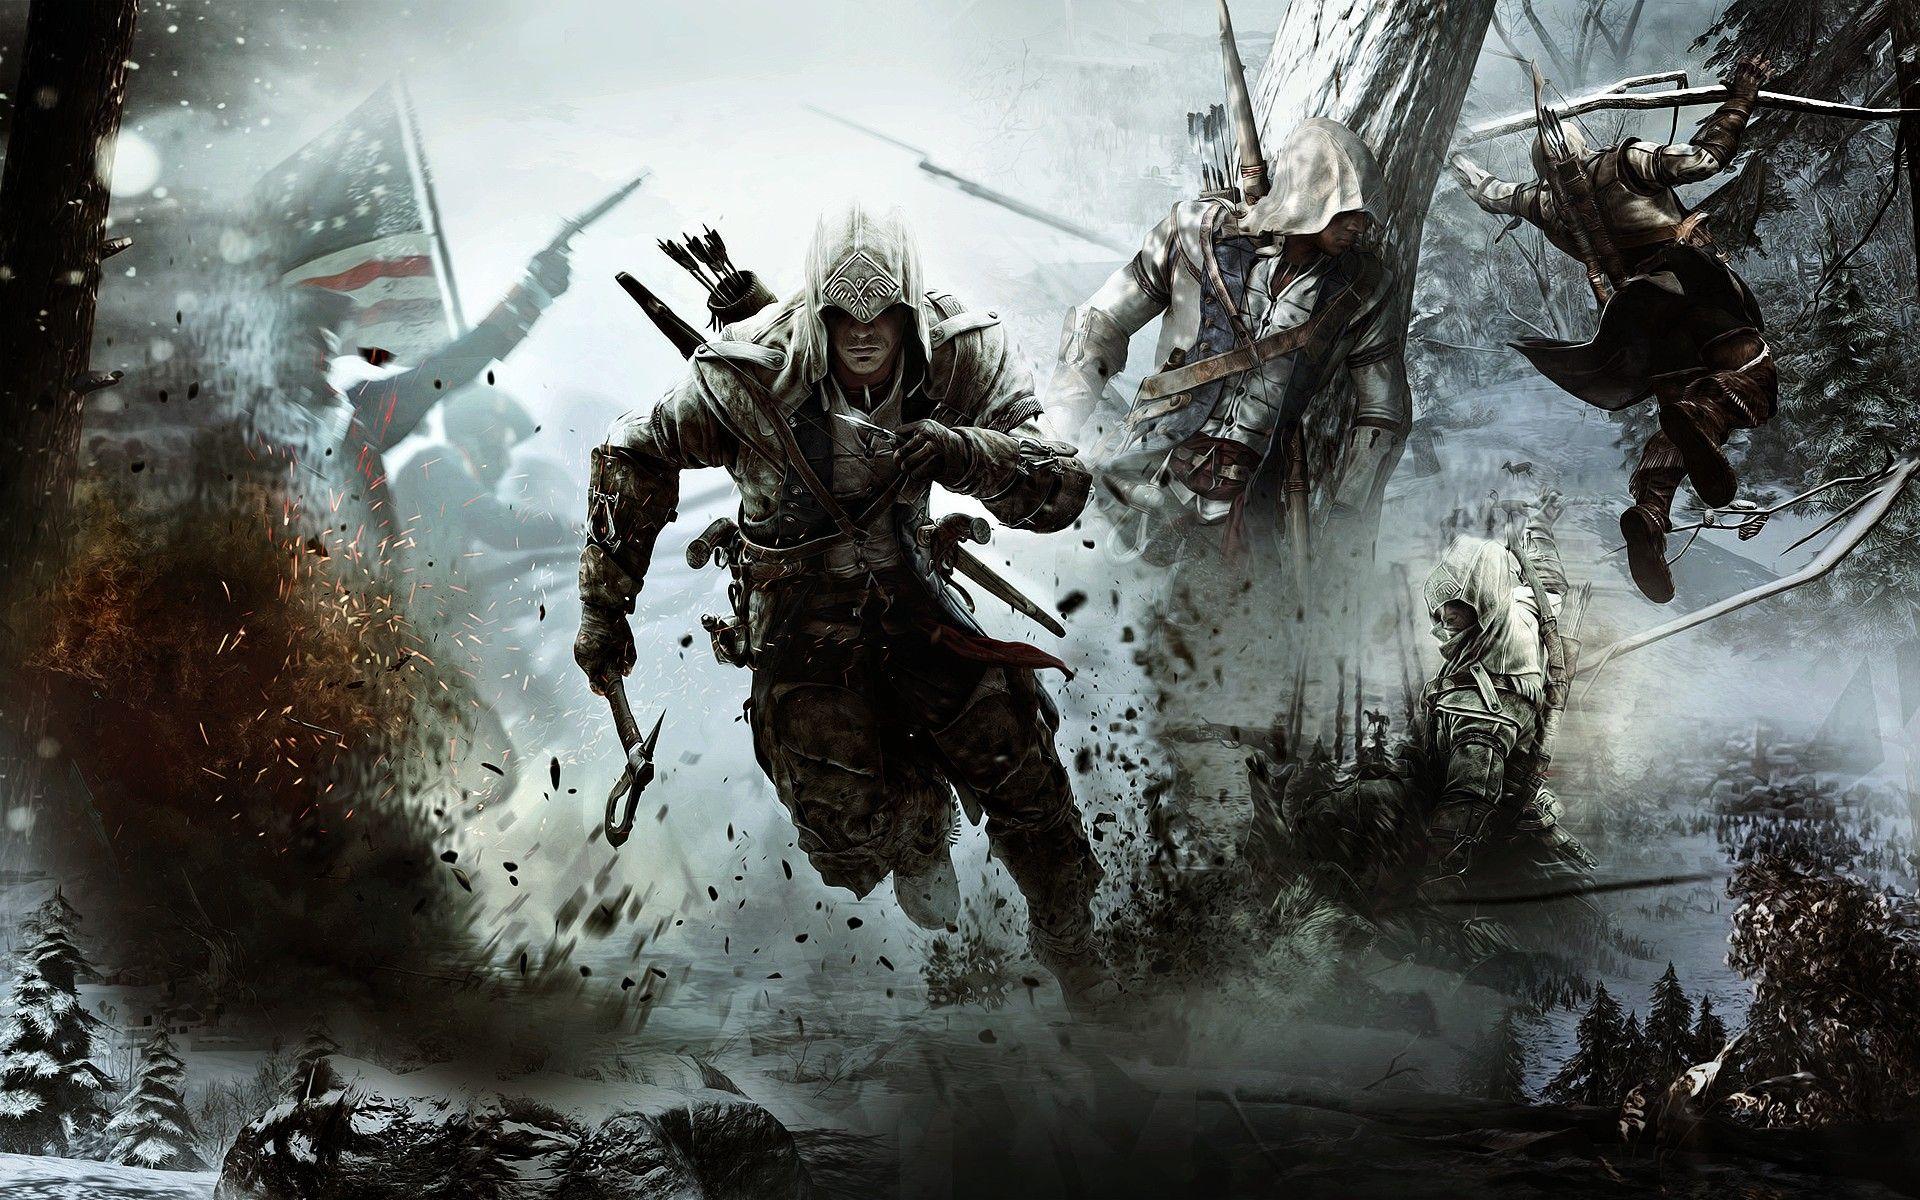 Wallpaper Assassins Creed 3 PC game 1920x1080 Full HD 2K Picture Image